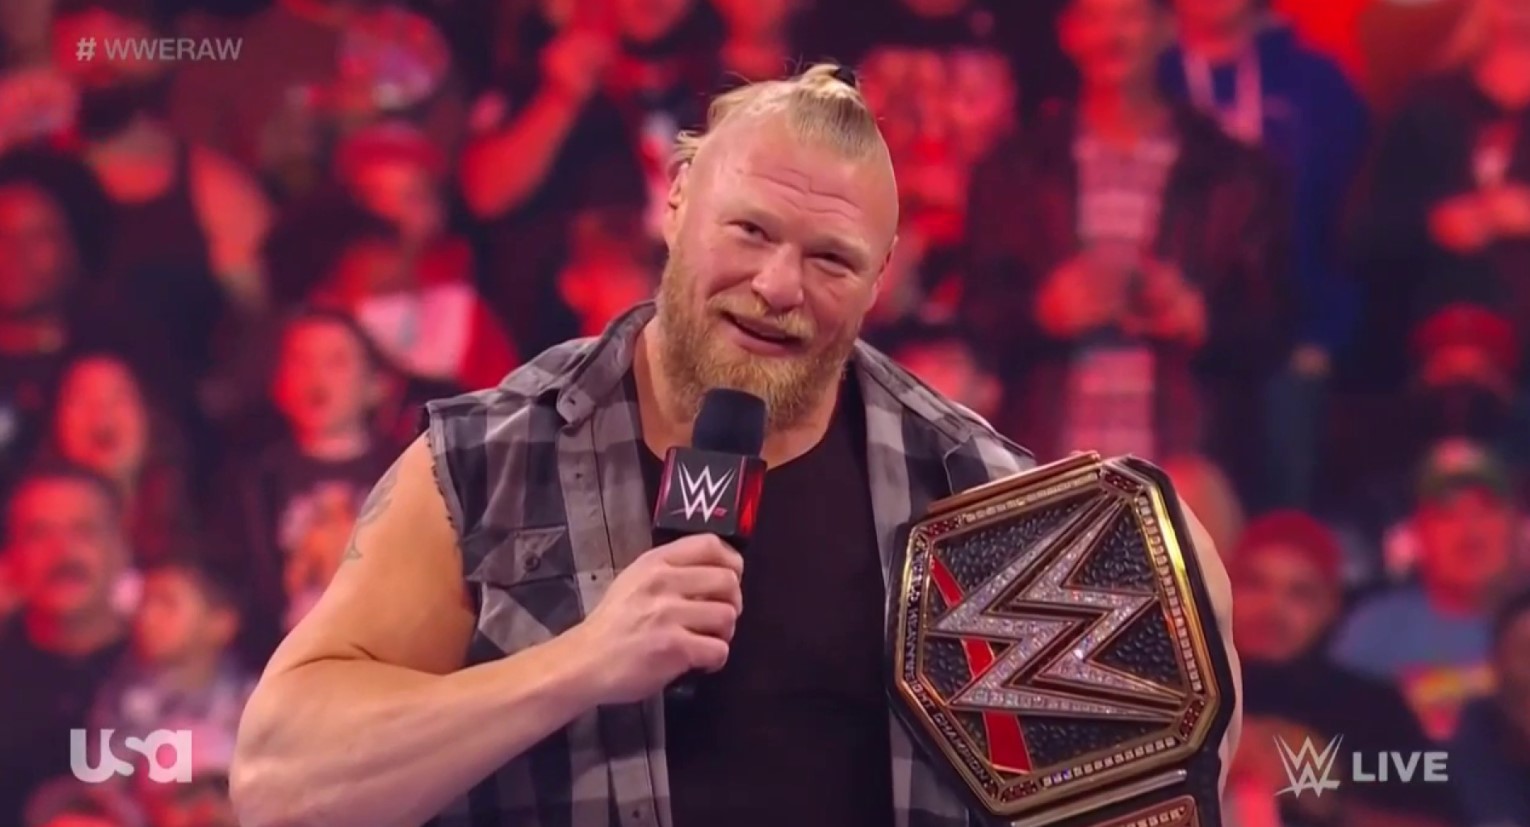 WWE Raw: Brock Lesnar to appear on Monday Night Raw next week in Philadelphia, check details